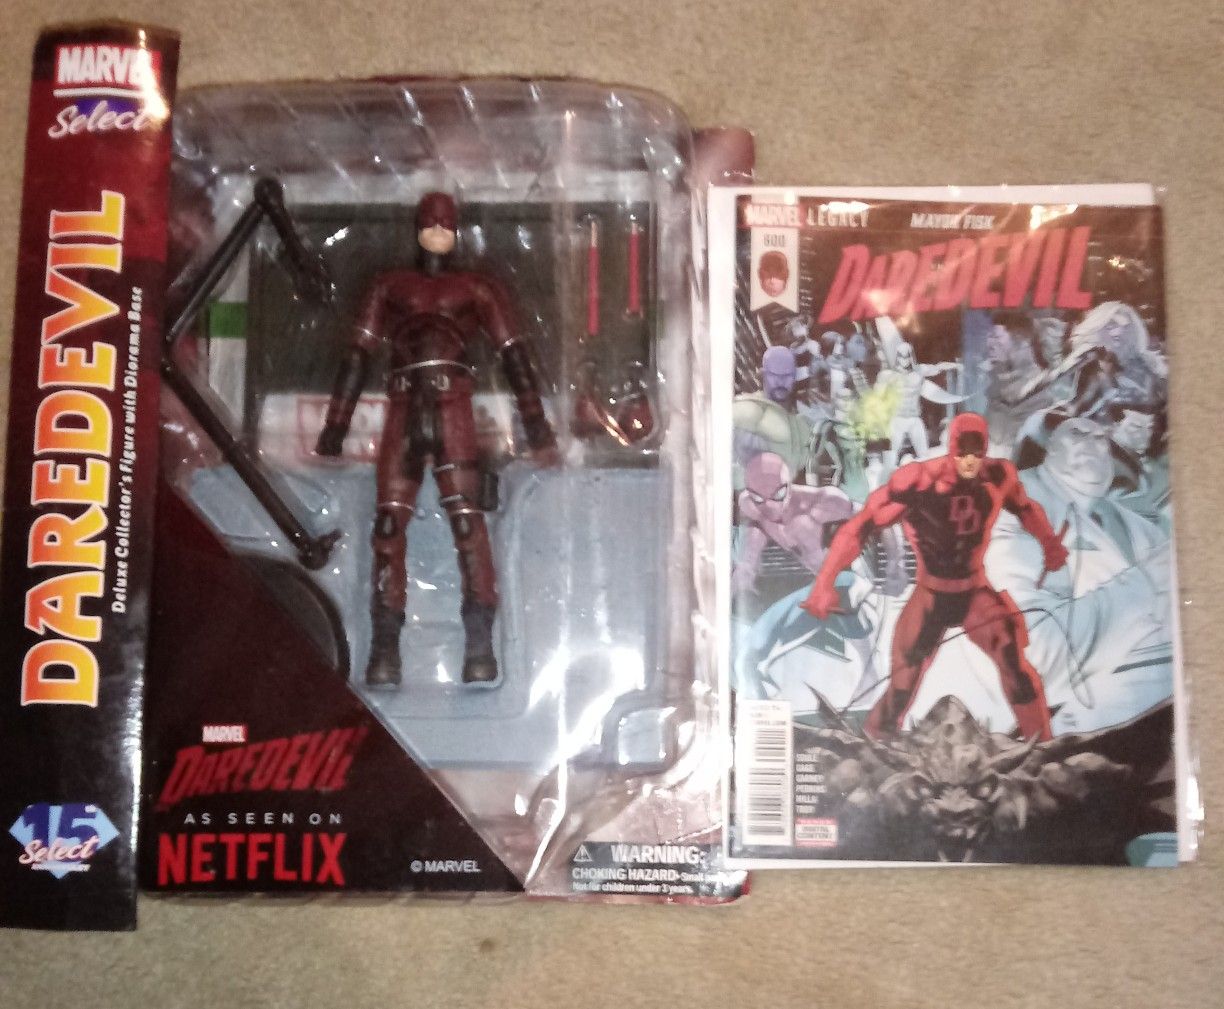 Marvel Select Netflix Daredevil Action Figure with Rare Comic